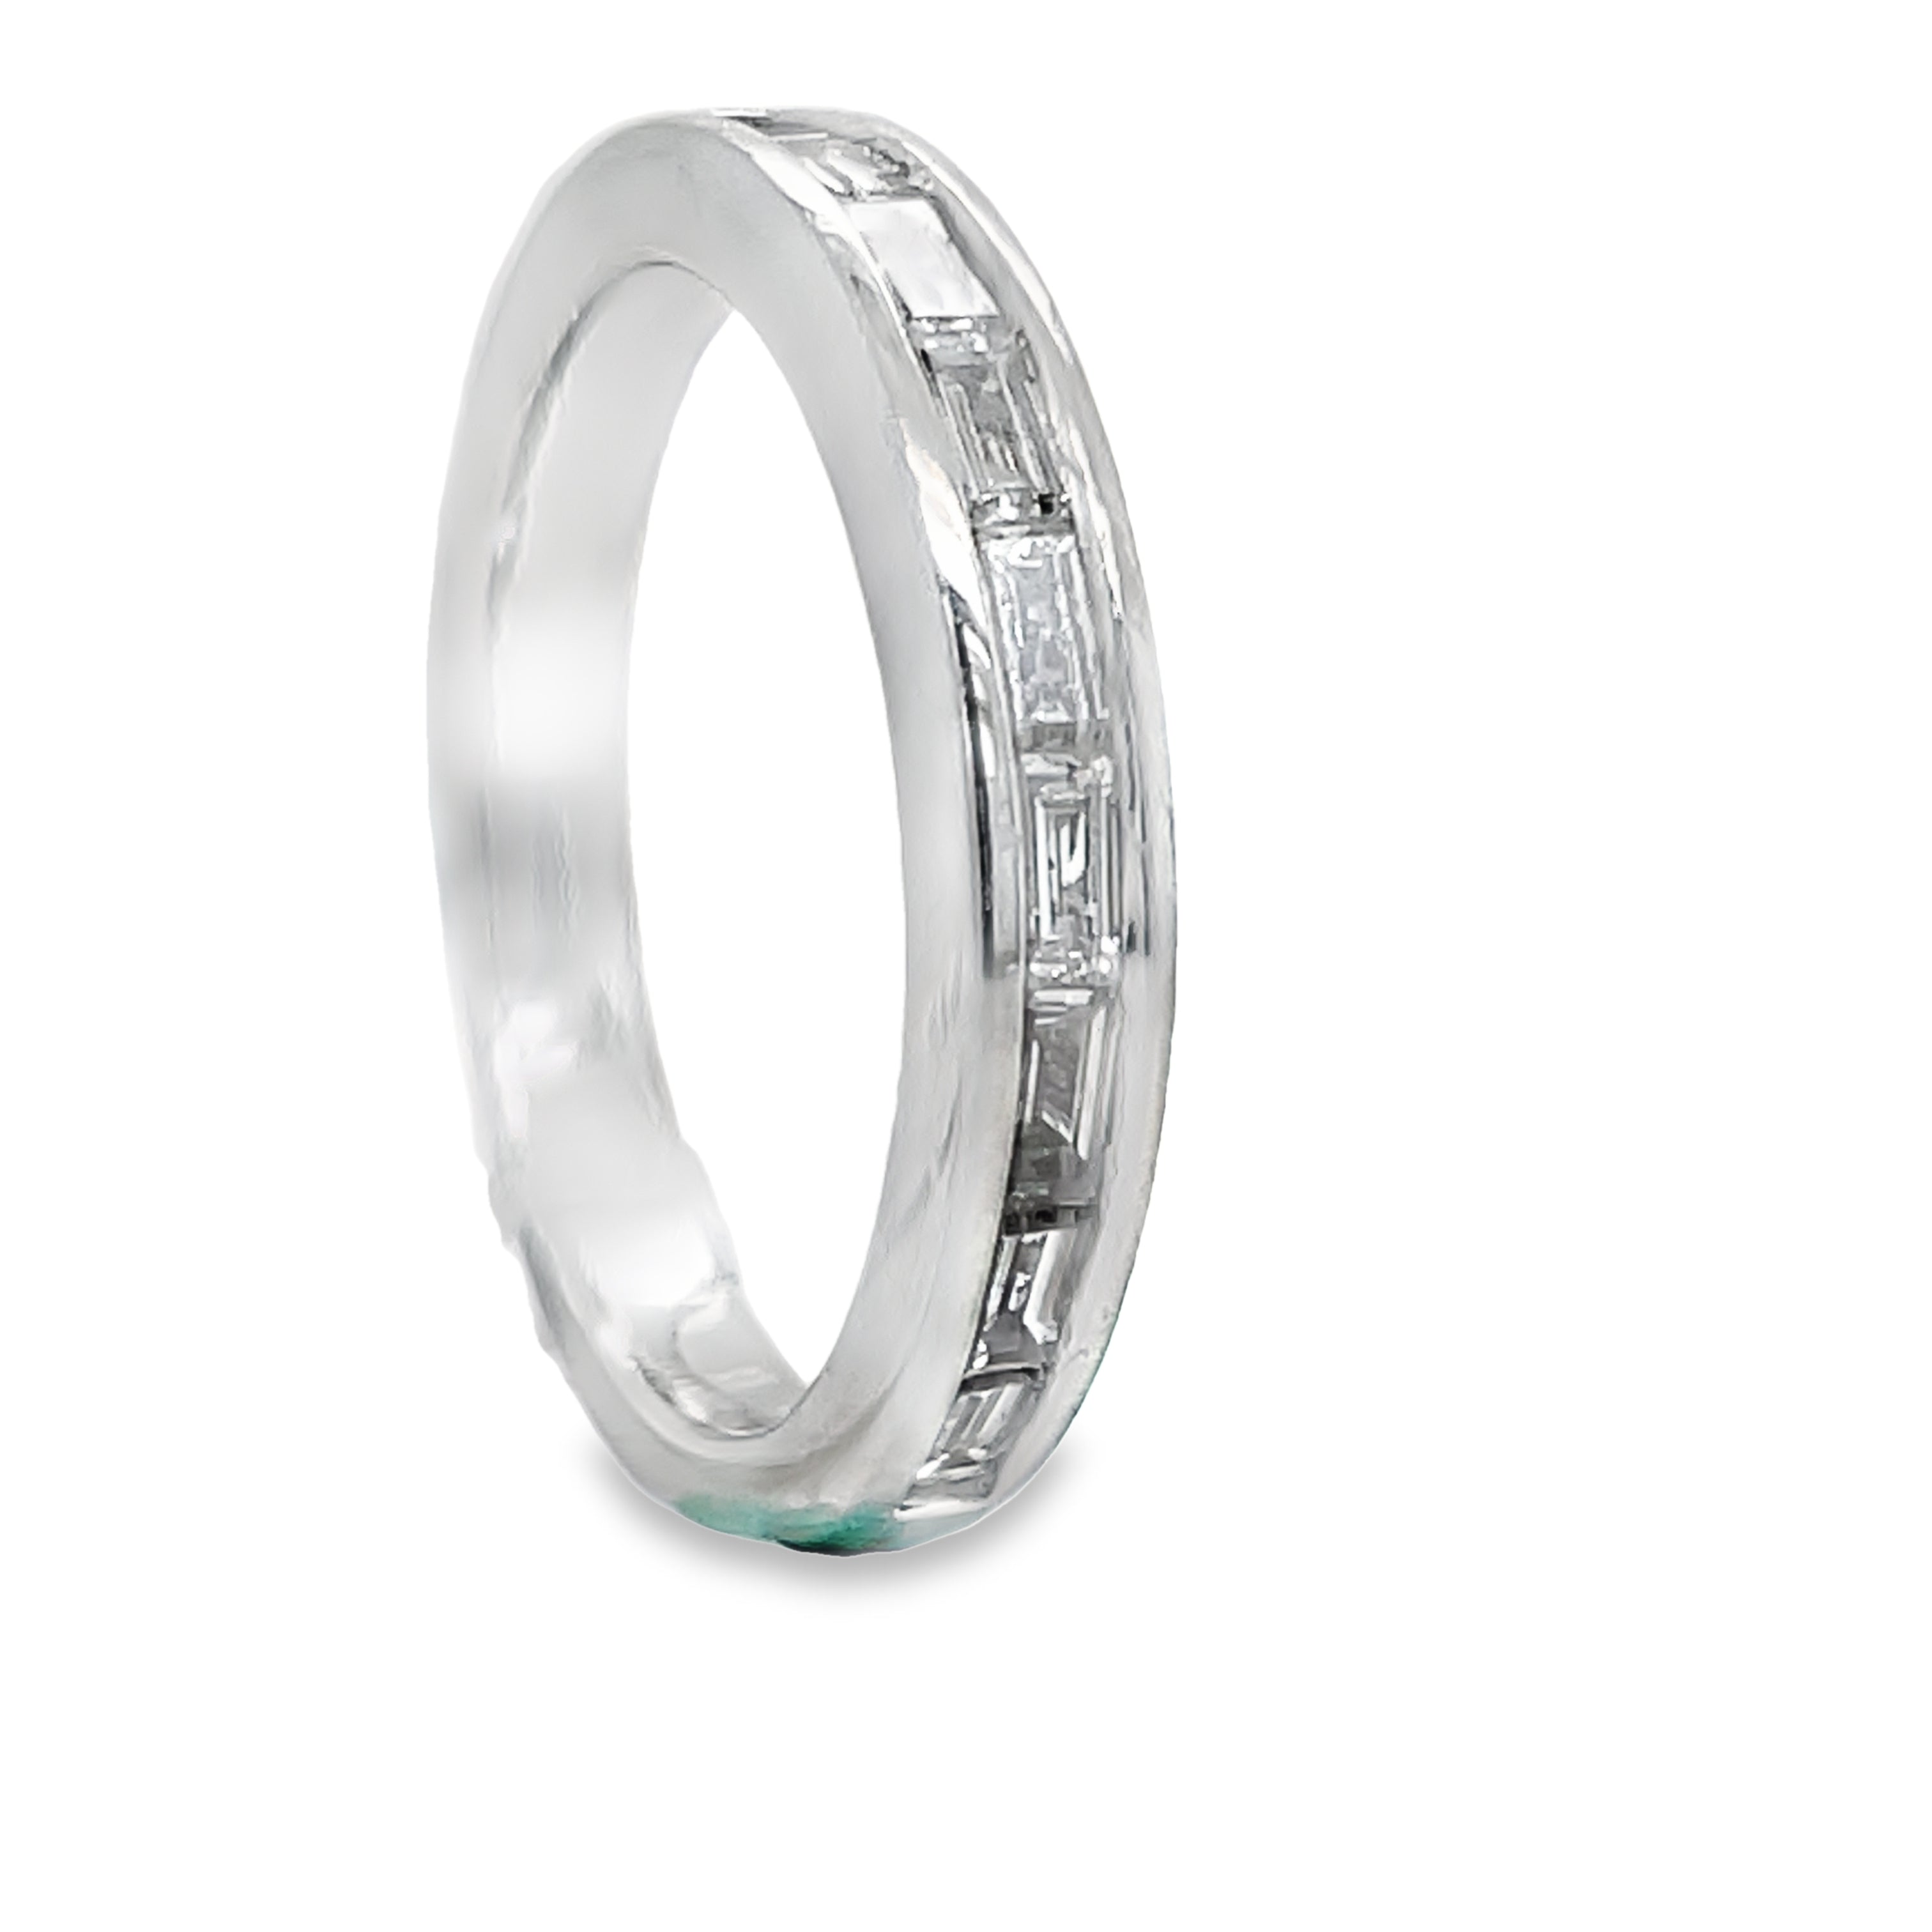 This stunning anniversary band features a channel set of sparkling baguette diamonds totaling 0.62 cts. Made of platinum, this band is both elegant and durable. Perfect for celebrating milestone anniversaries and adding a touch of luxury to any outfit.